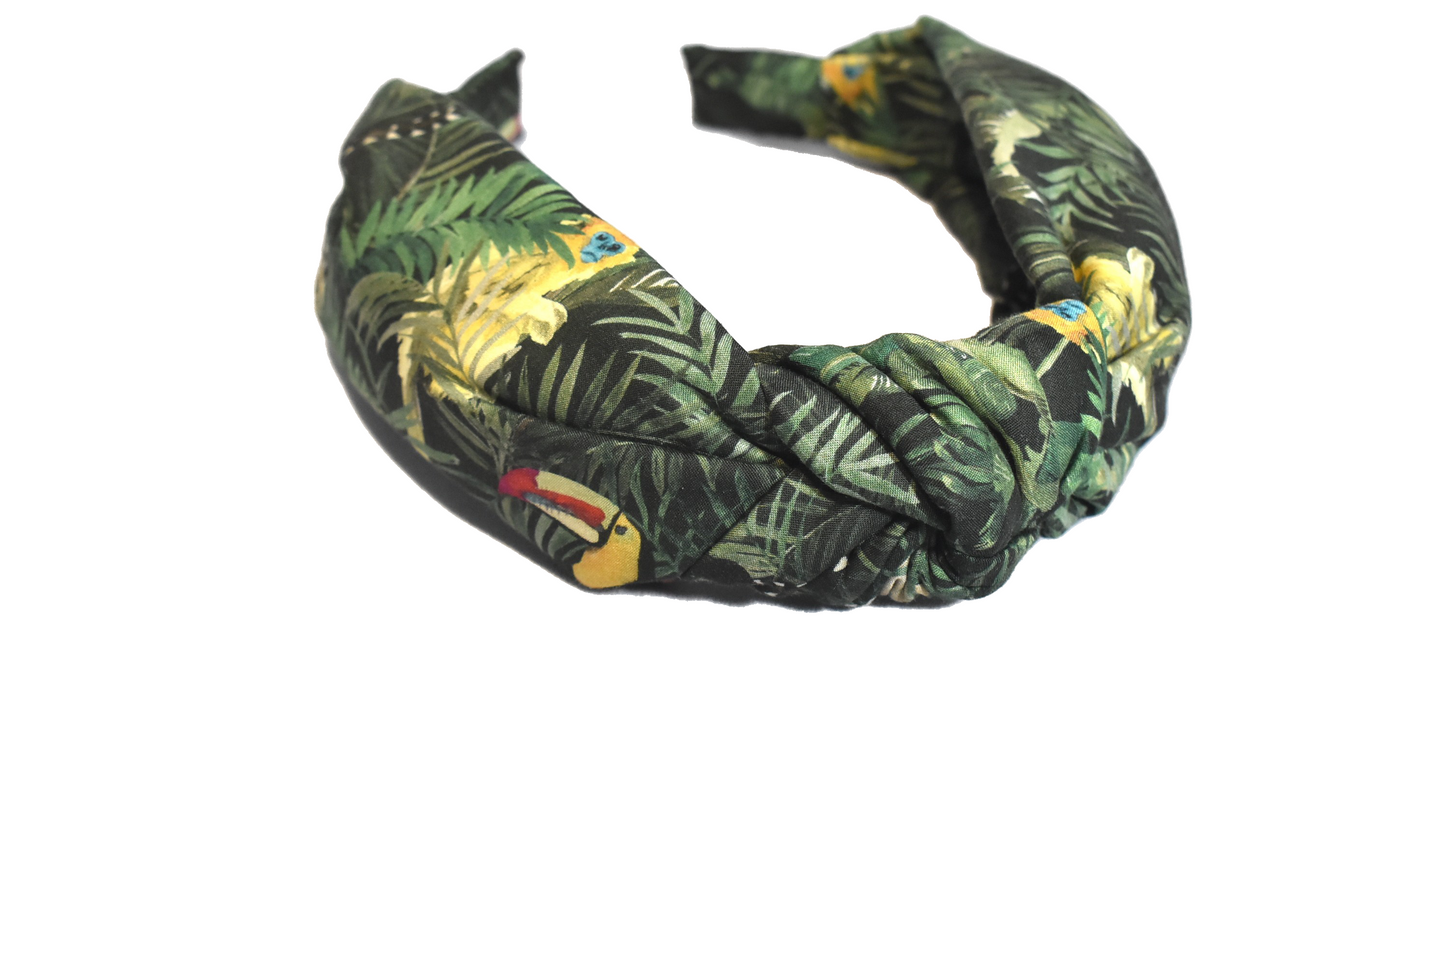 Kids Knot Alice band - Liberty of London Tou-Can Hide Jungle print